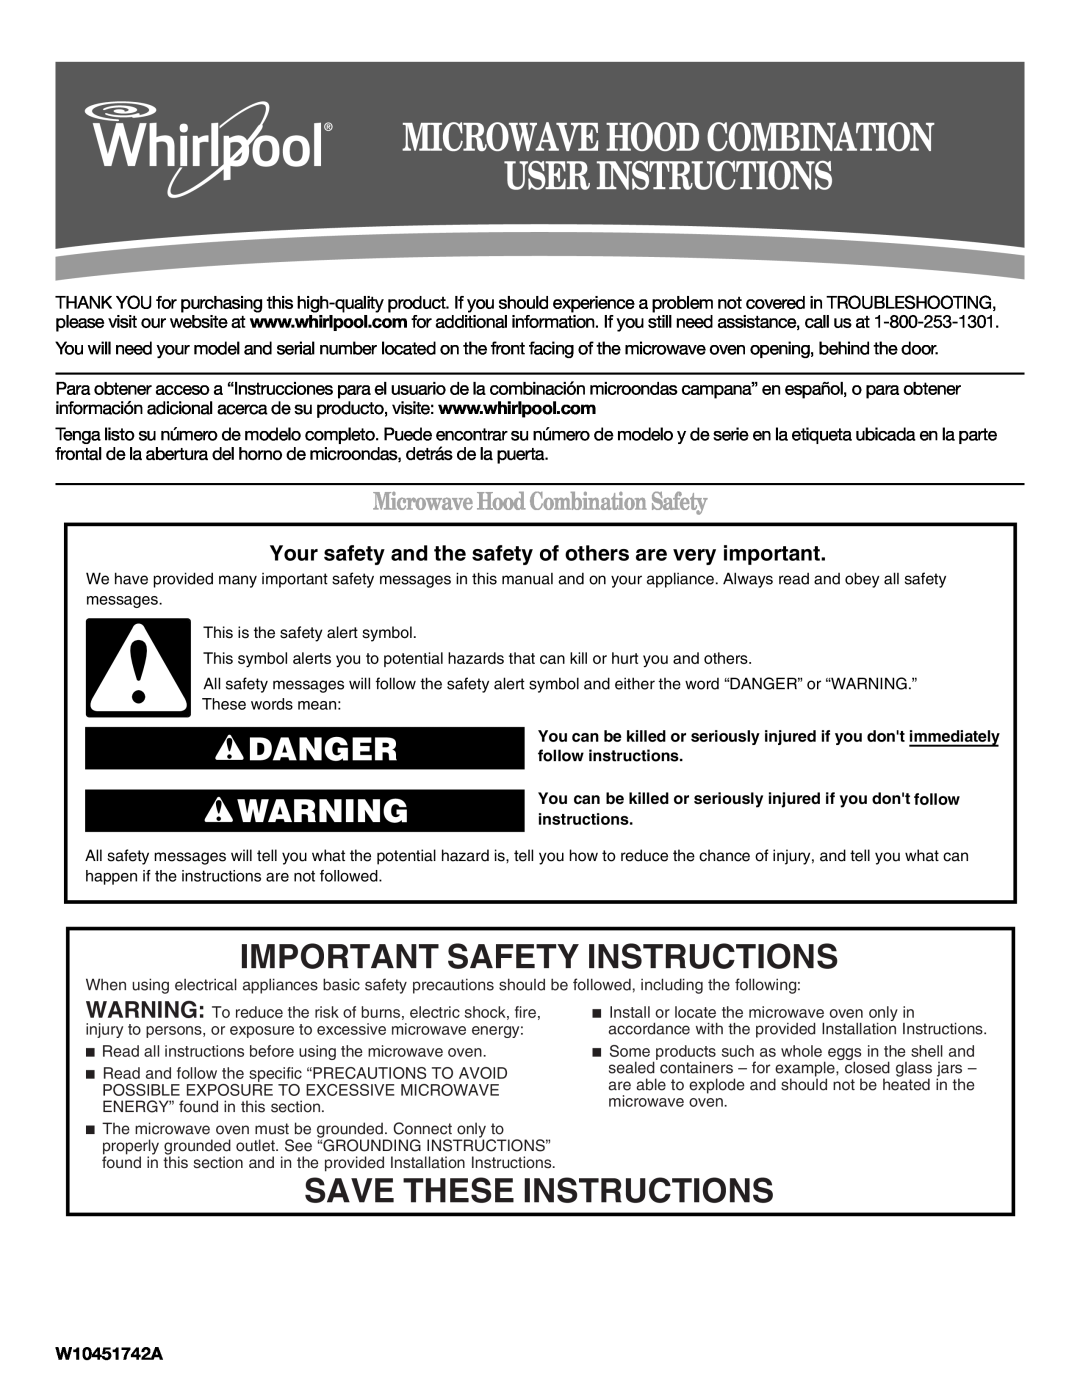 Whirlpool WMH53520AE important safety instructions Important Safety Instructions, Save These Instructions, Danger 